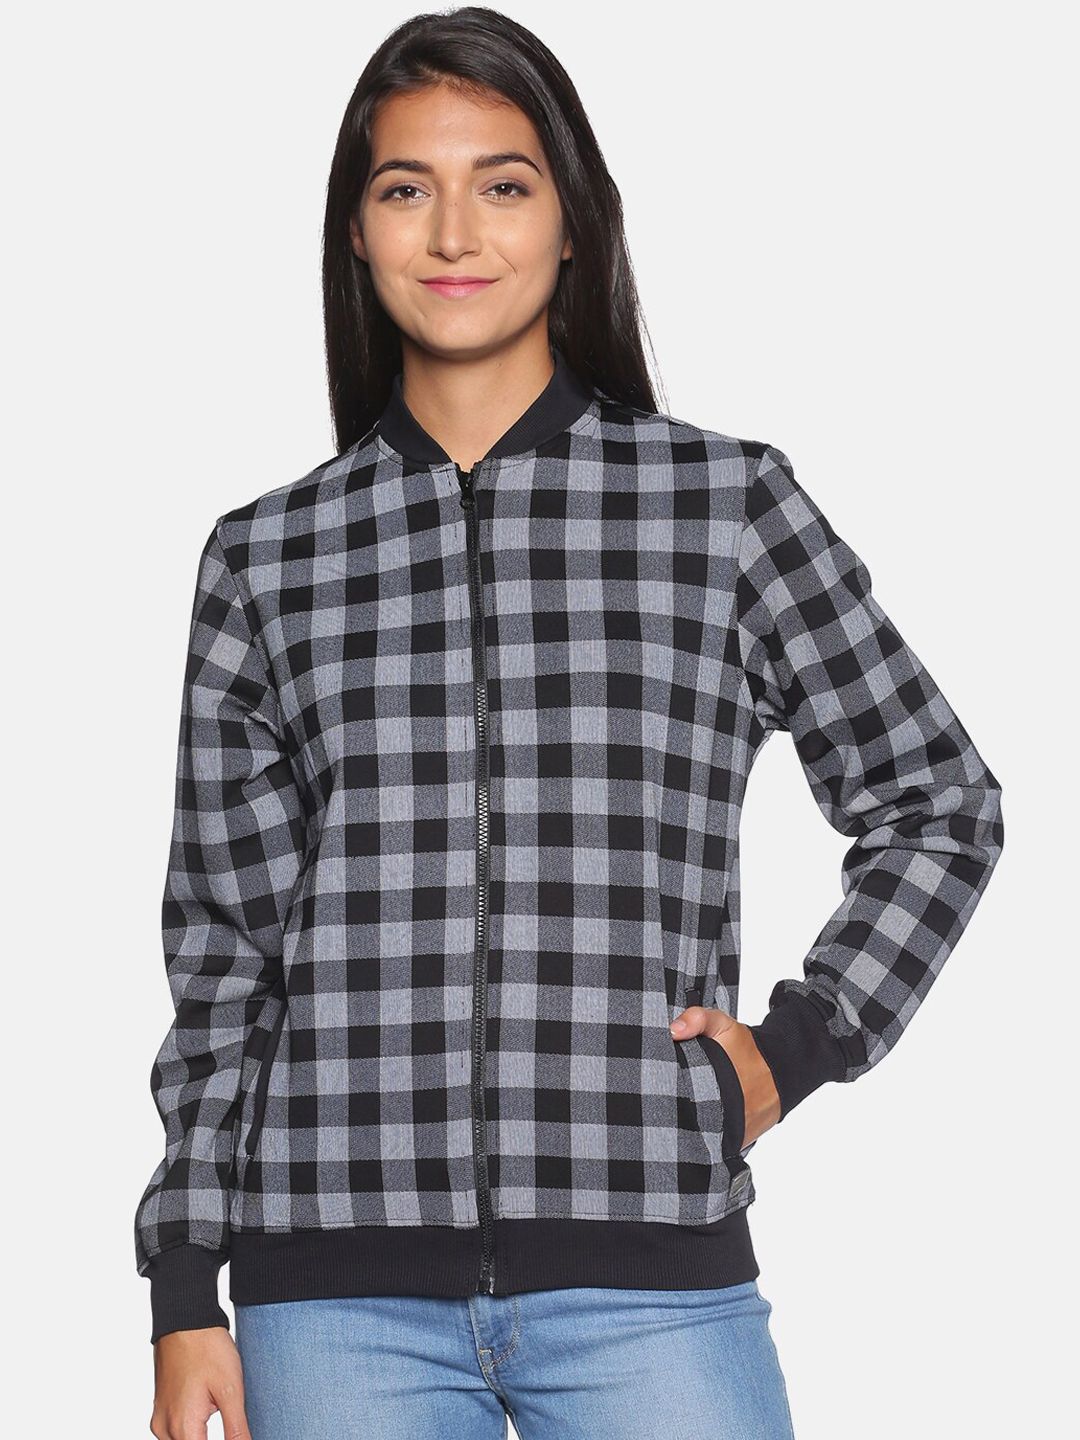 Campus Sutra Women Black and Grey Checked Bomber Jacket Price in India